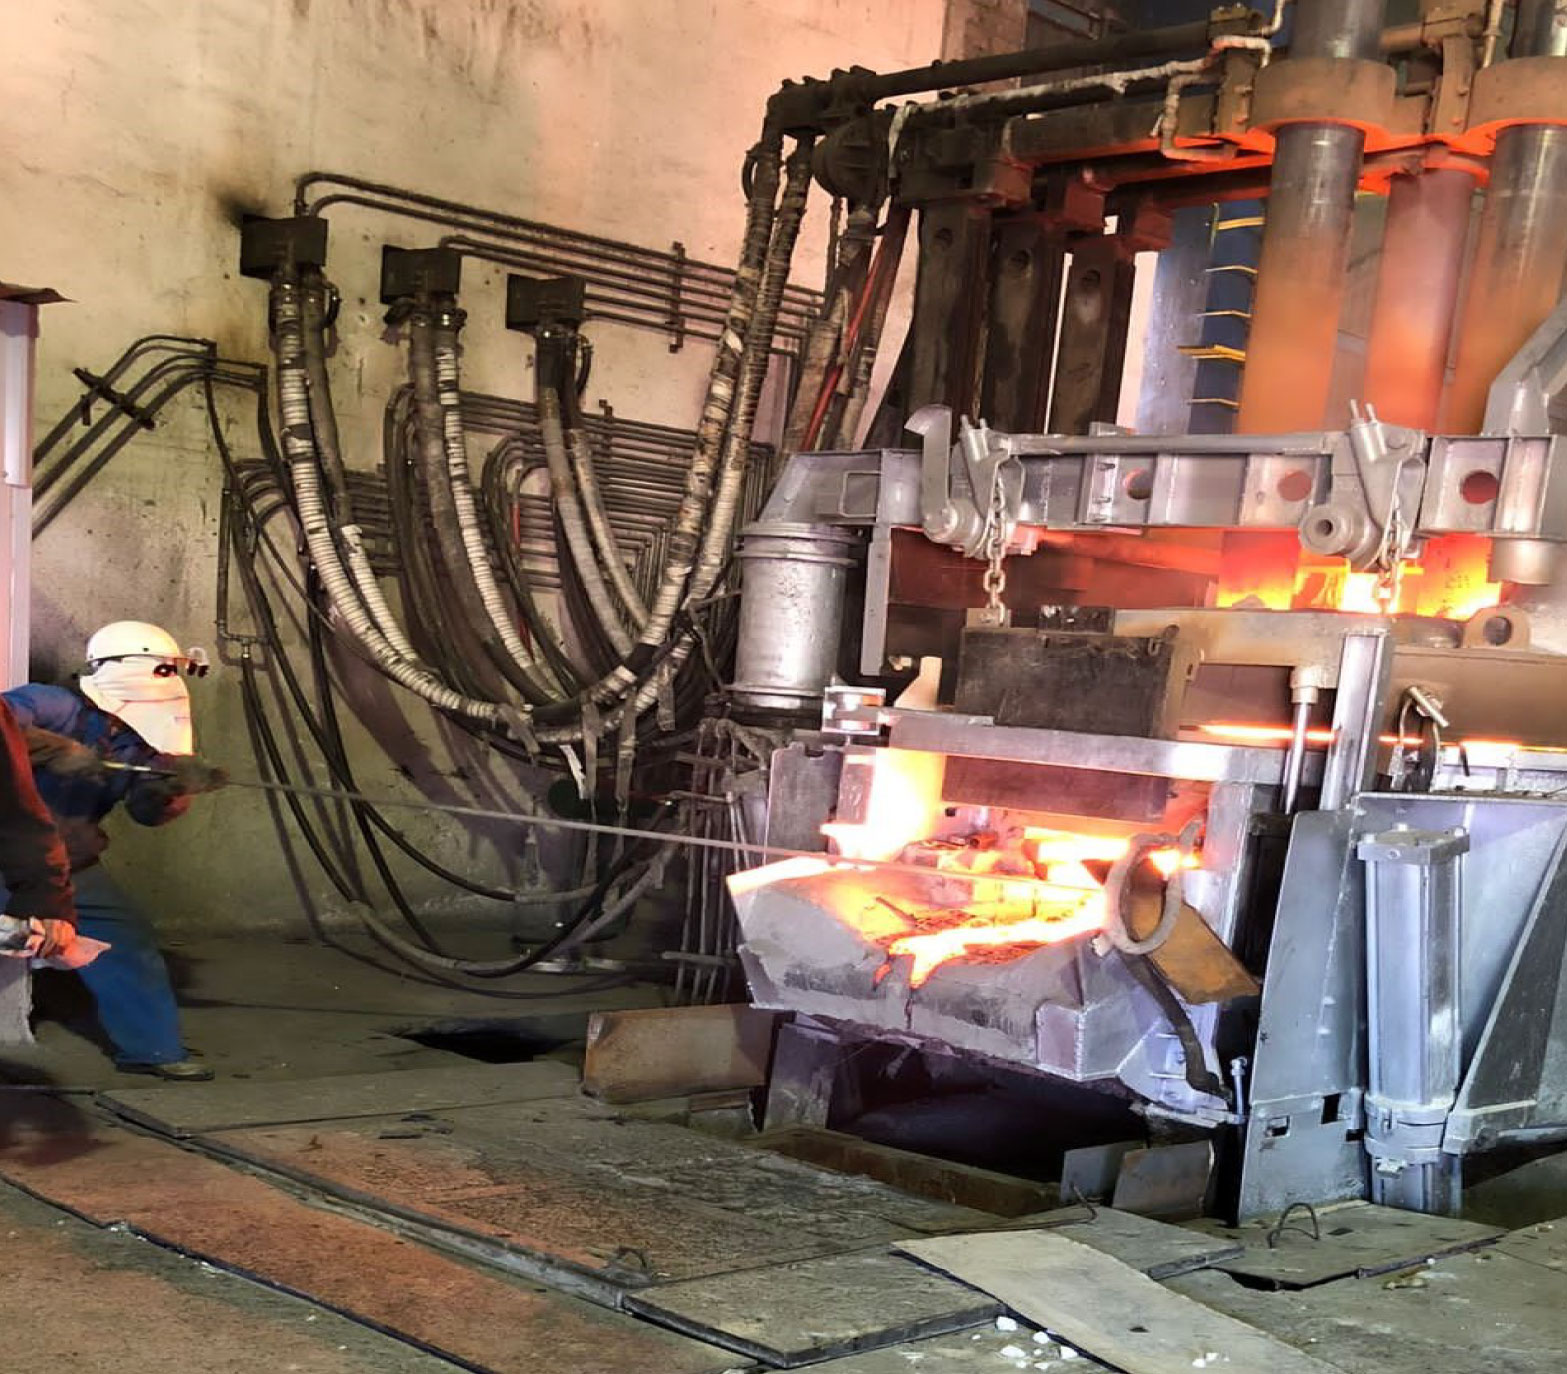 Turnkey Opportunity - Available Now -  “Mini Mill” “Just in Time” Steel Mill for the manufacture of steel billets, rebar, rounds, flats, squares, and angles.